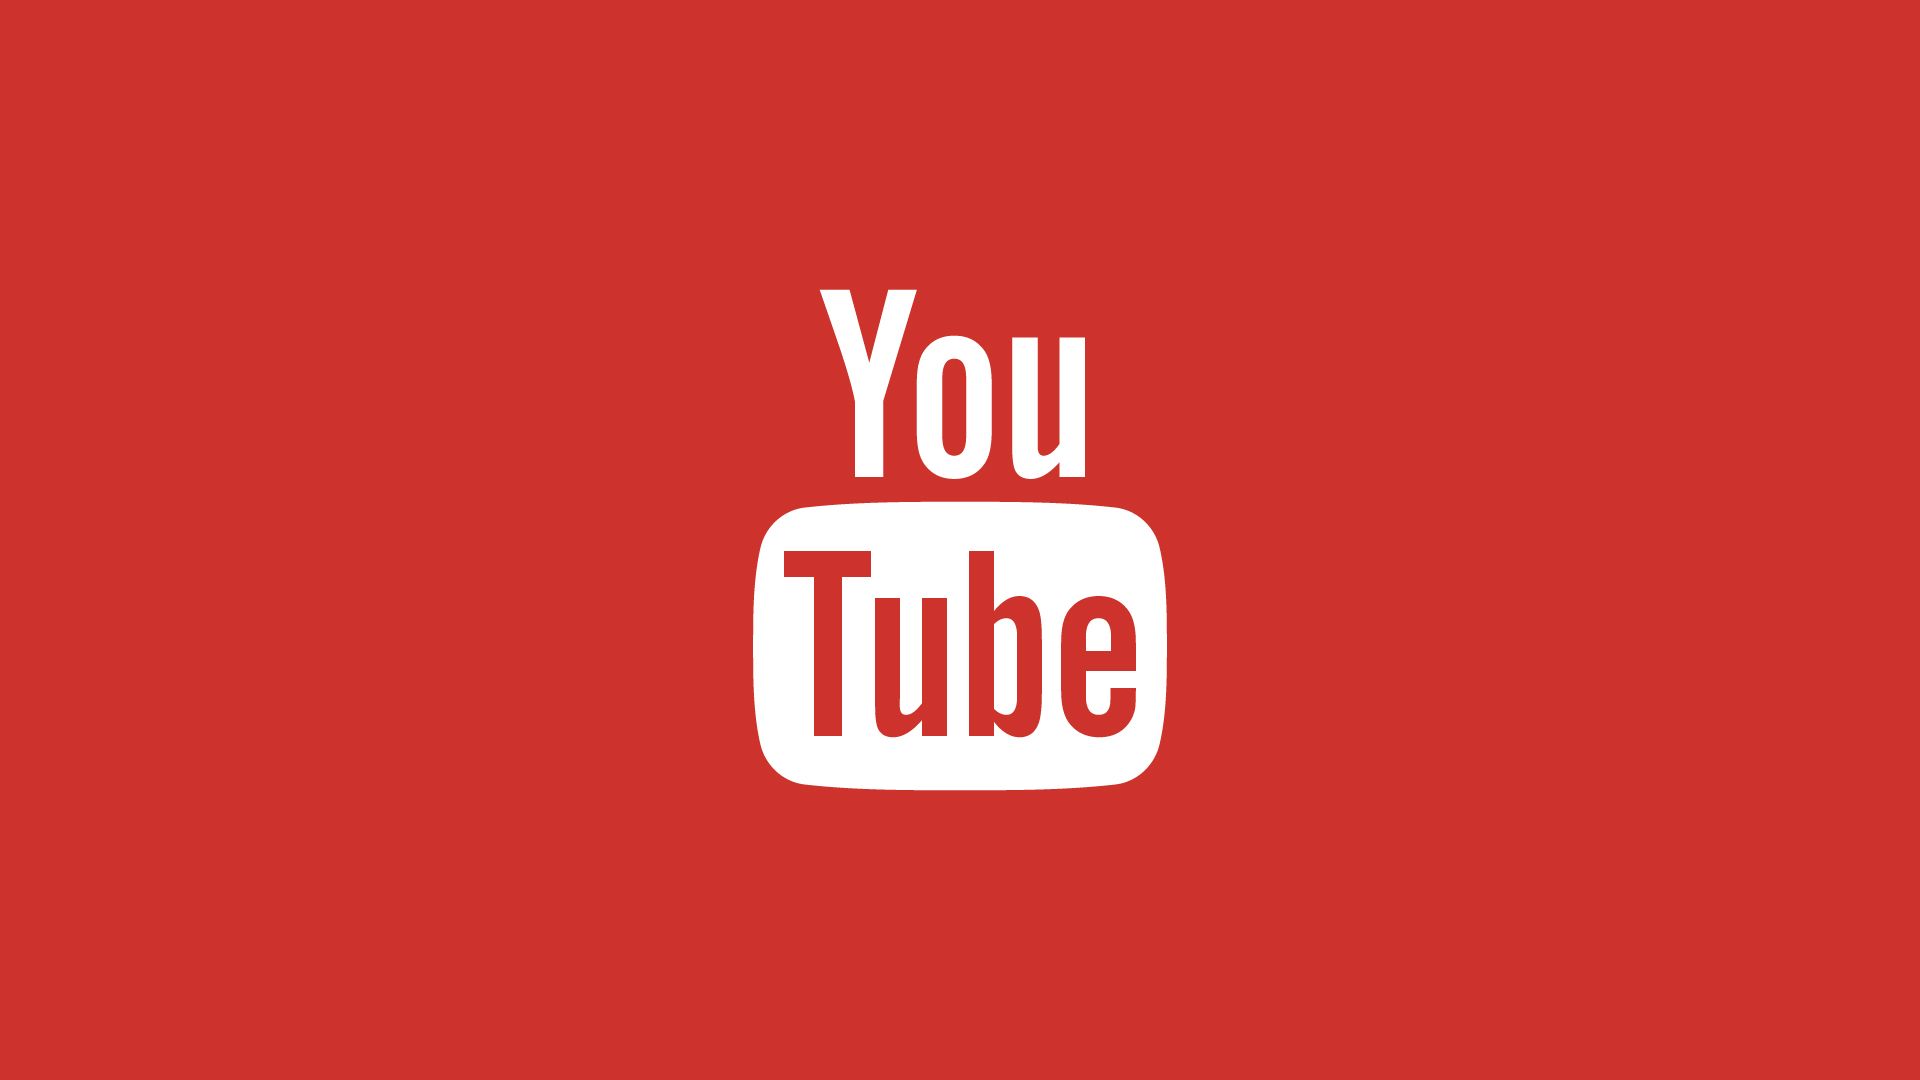 Cool Youtube Backgrounds HD Free download 